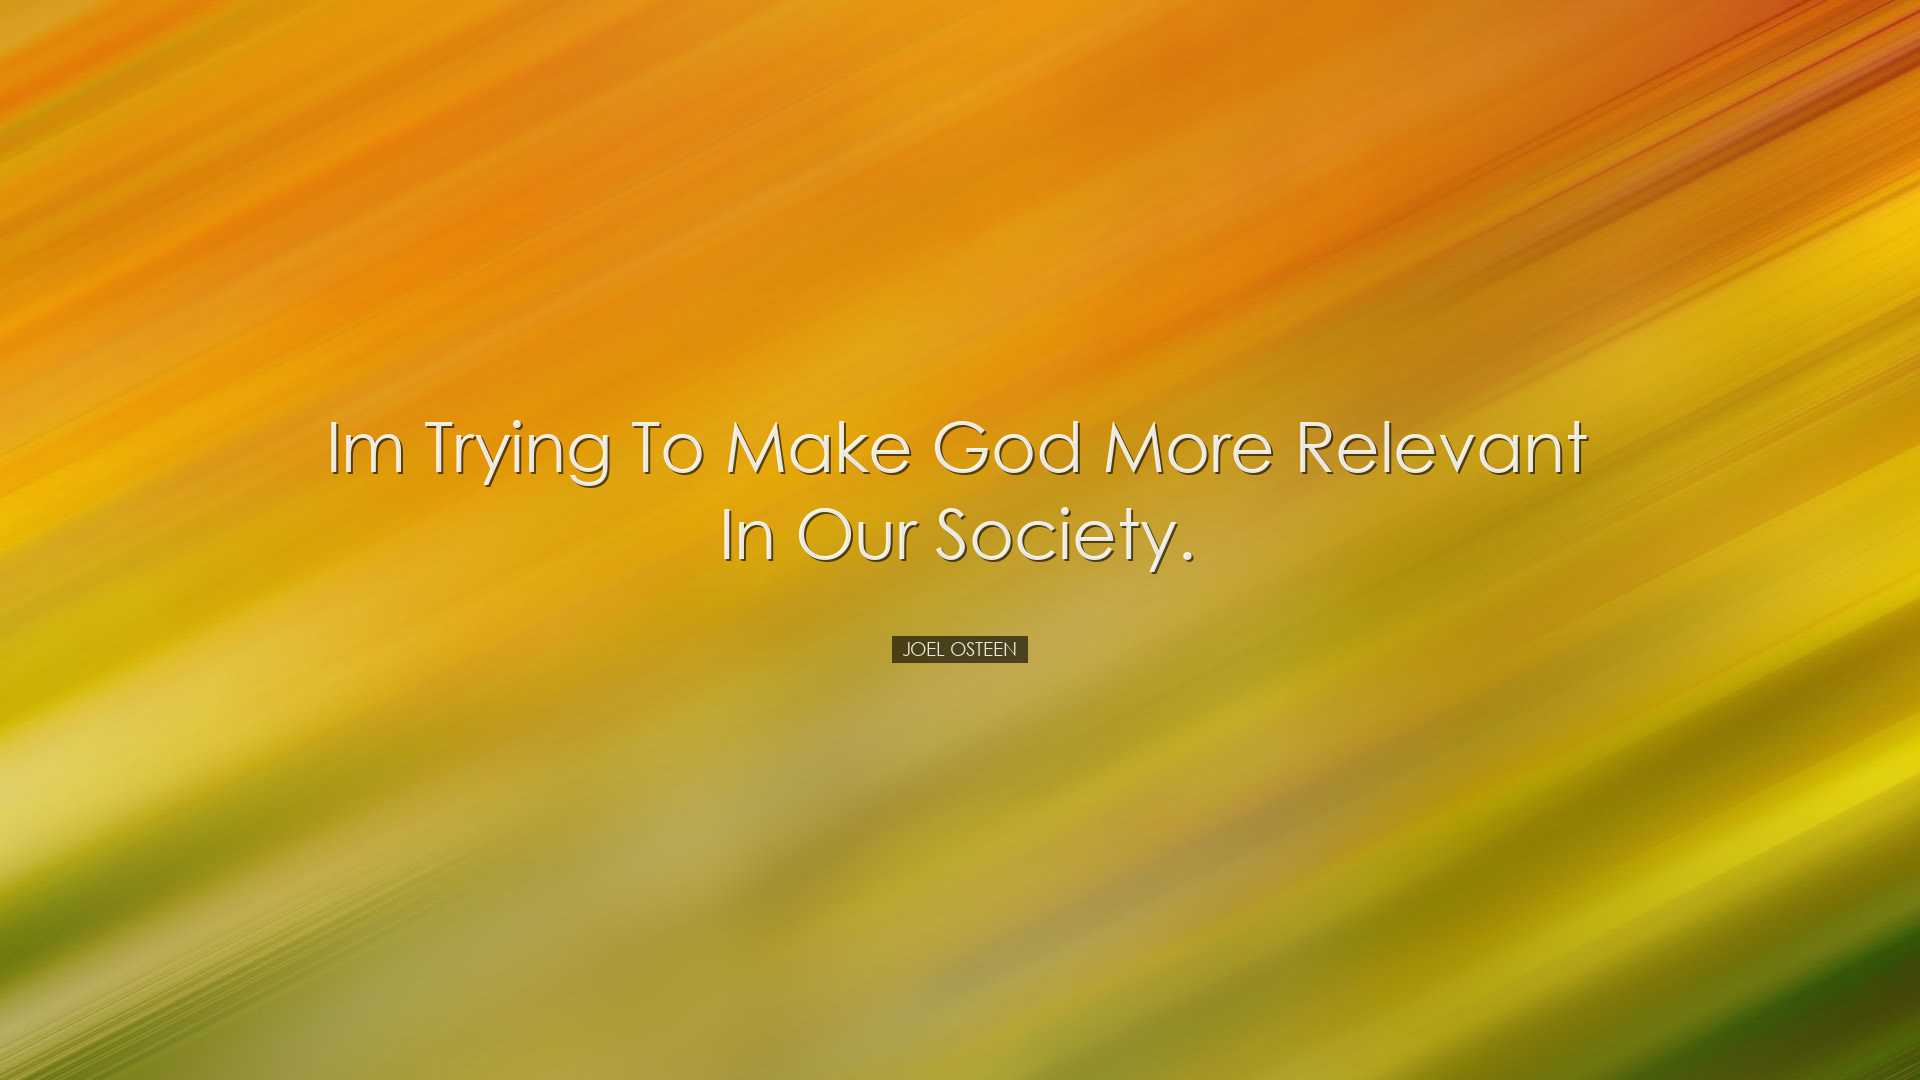 Im trying to make God more relevant in our society. - Joel Osteen